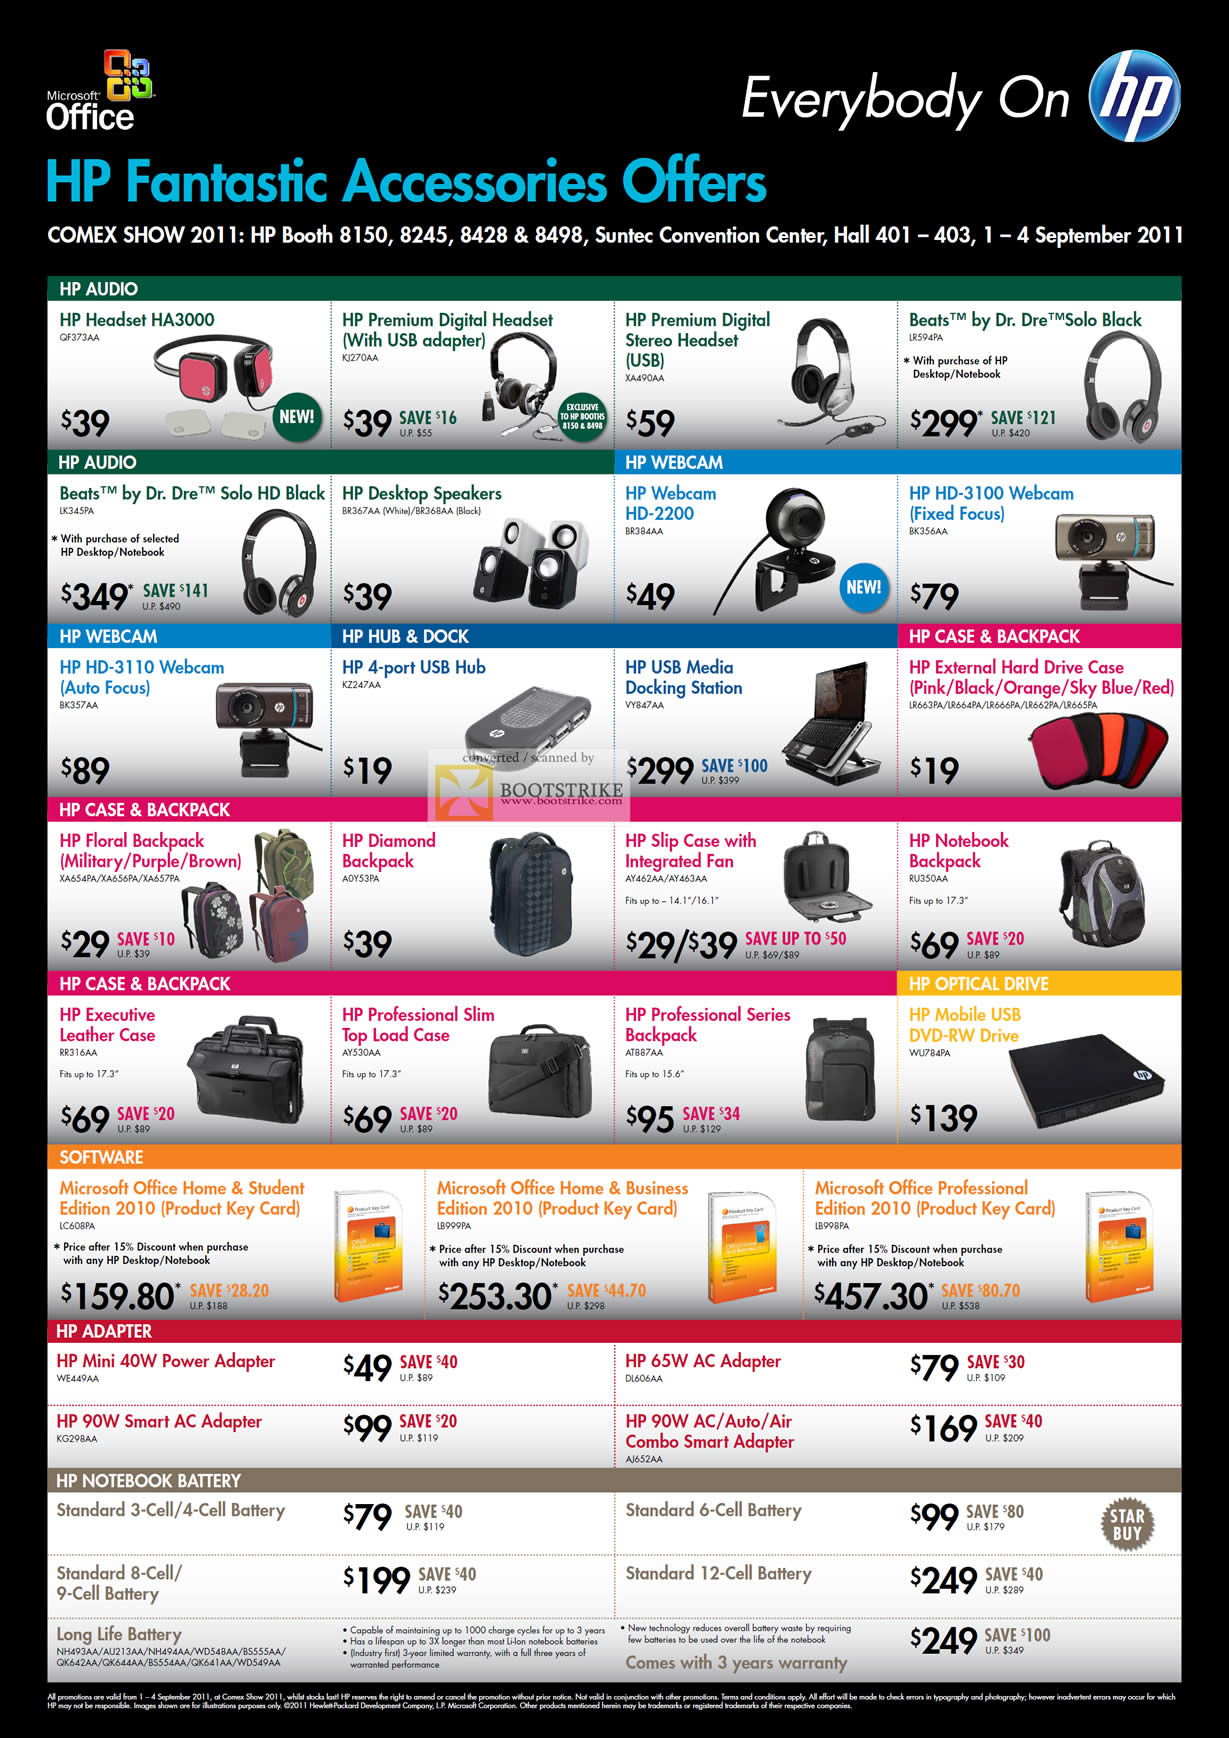 COMEX 2011 price list image brochure of HP Accessories Headset USB Beats Dr. Dre Solo Black Speakers Webcam HD-3110 Hub Docking Station Case Backpack Optical Drive Mobile USB Office Home Student 2010 PKC Adapter Battery